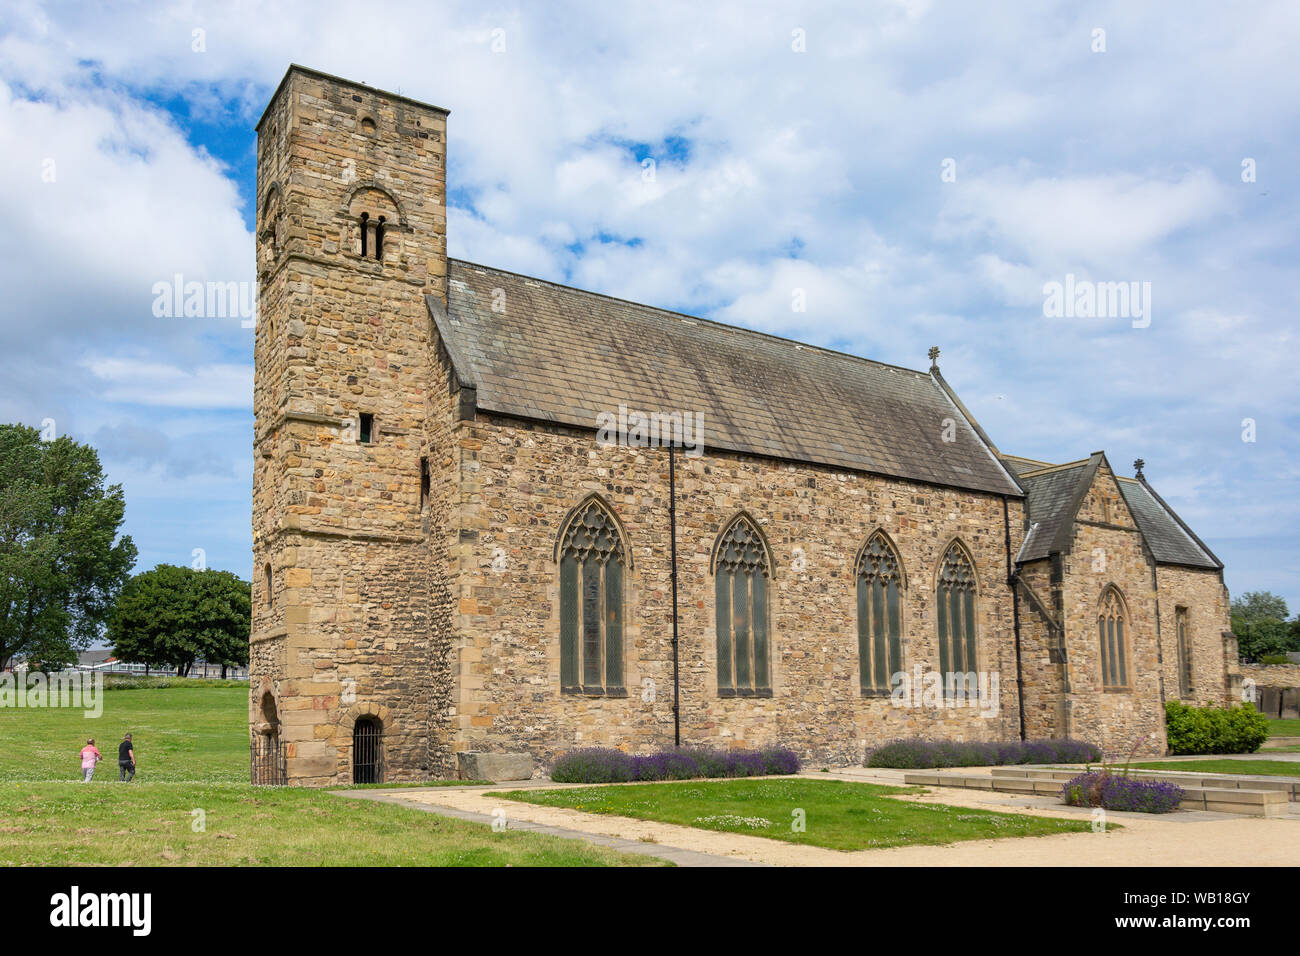 Historic St Peter's Church (674AD), St Peters' Way, Monkwearmouth, City of Sunderland, Tyne and Wear, England, United Kingdom Stock Photo